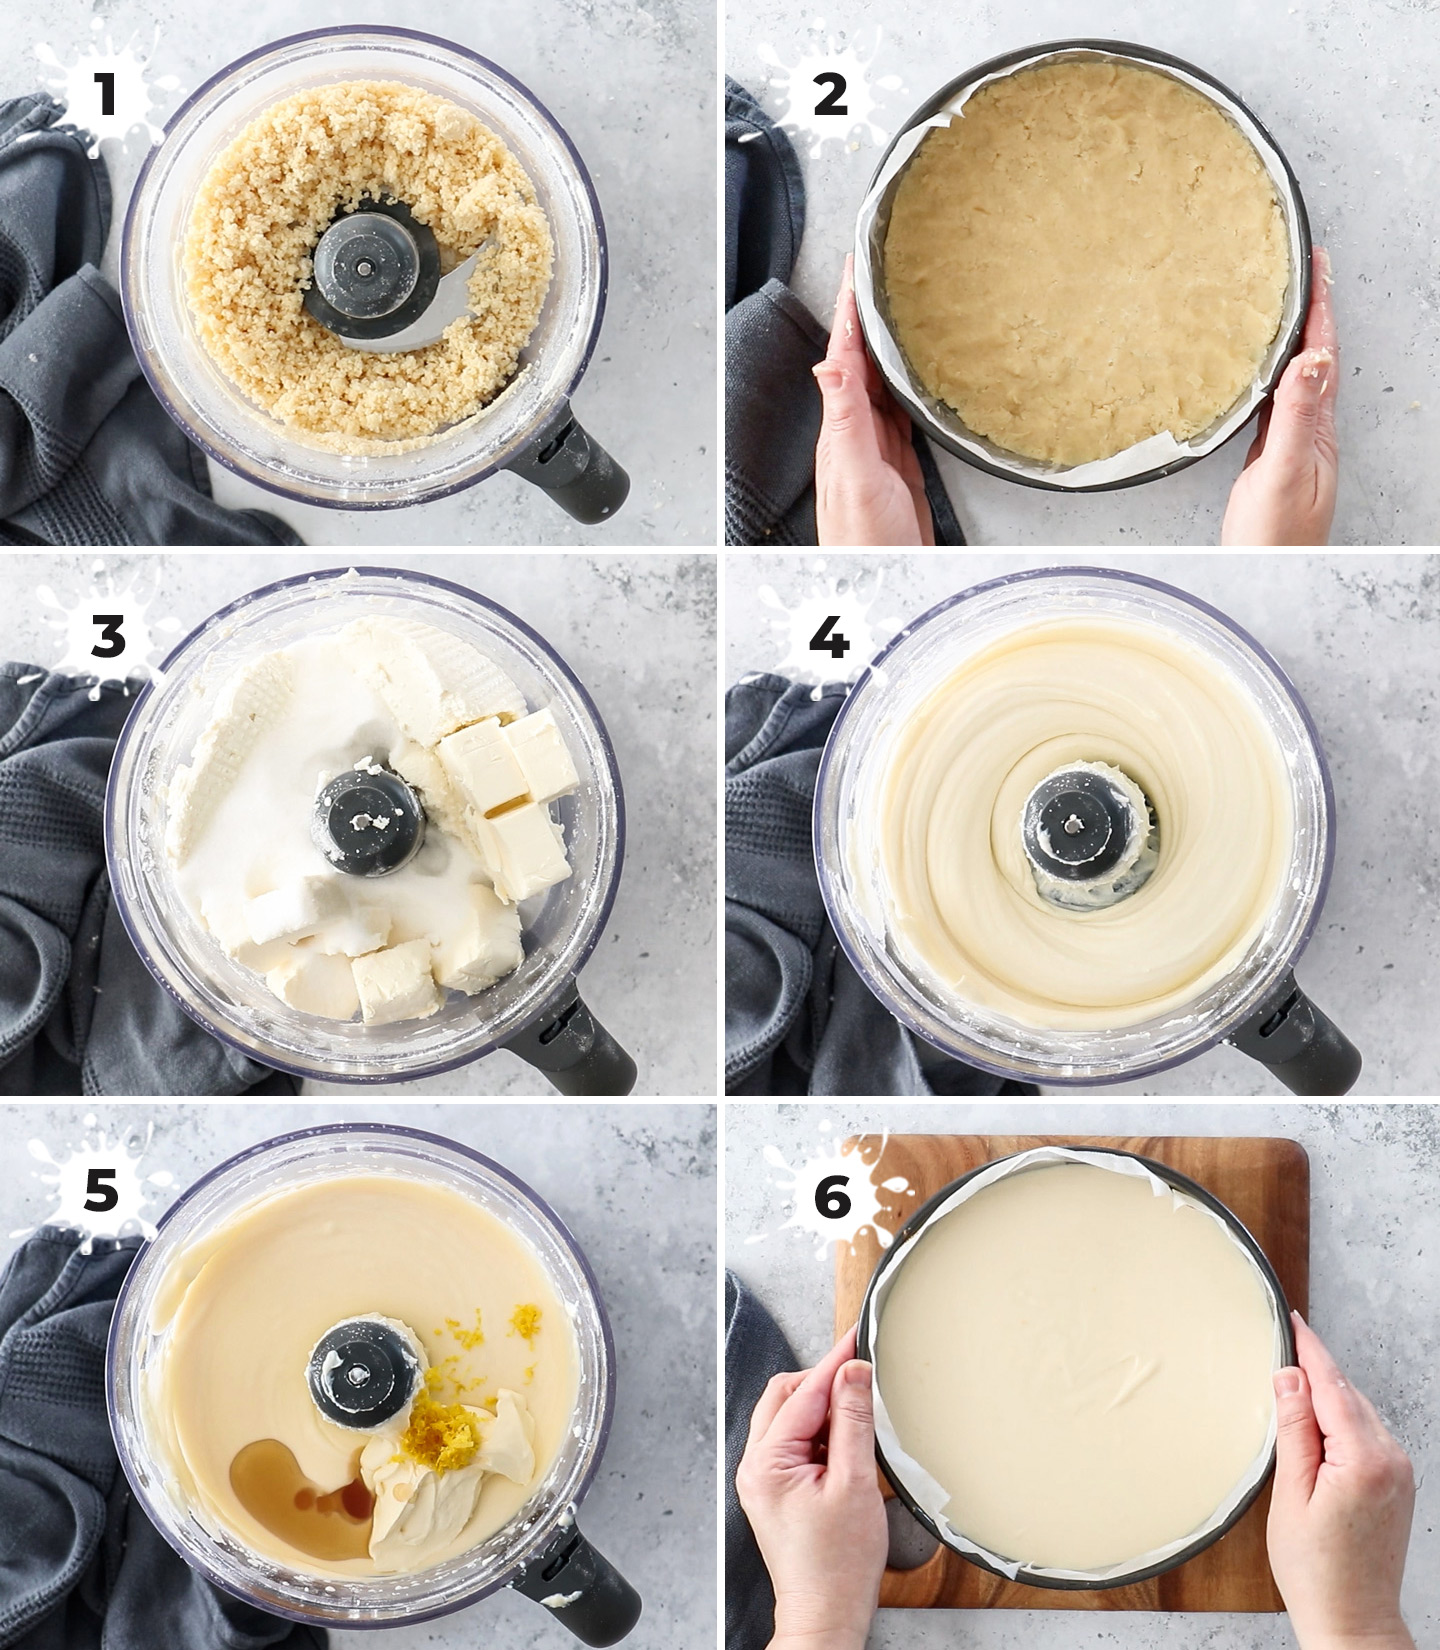 A collage showing how to make baked ricotta cheesecake.